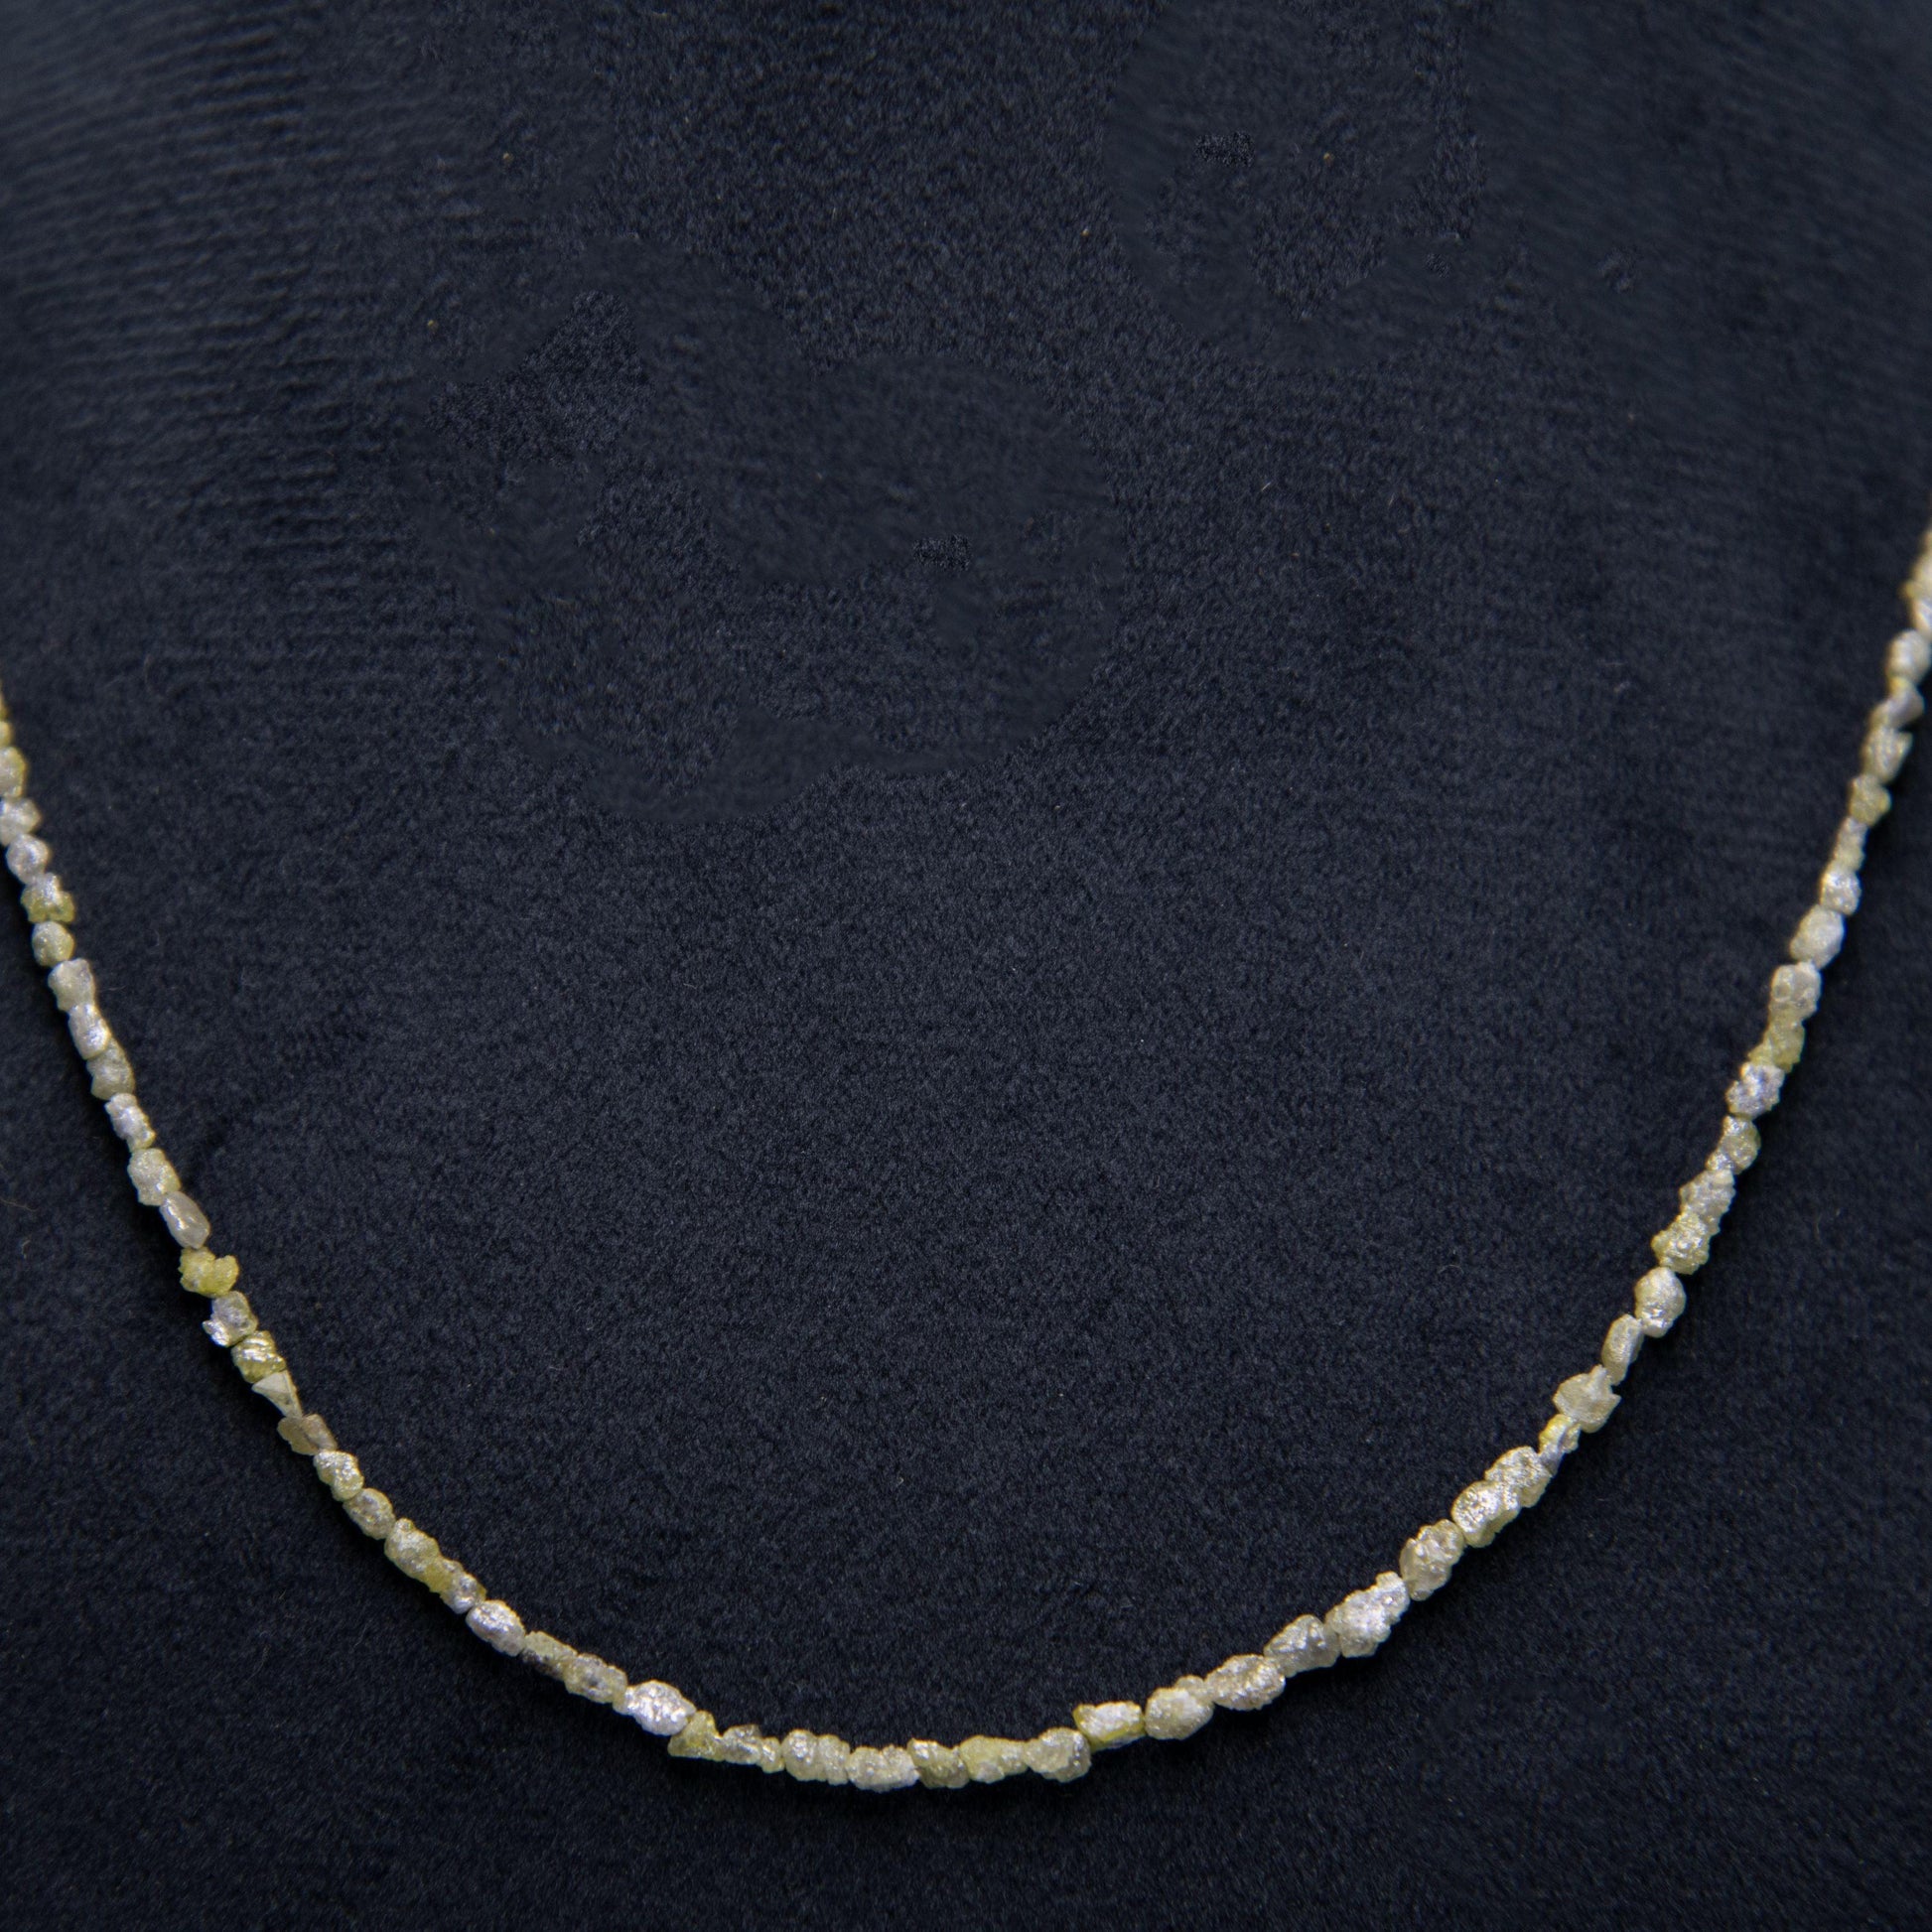 Green Rough Diamond Bead Necklace with Silver Clasp - DeKulture DKW-1381-Small-BNK